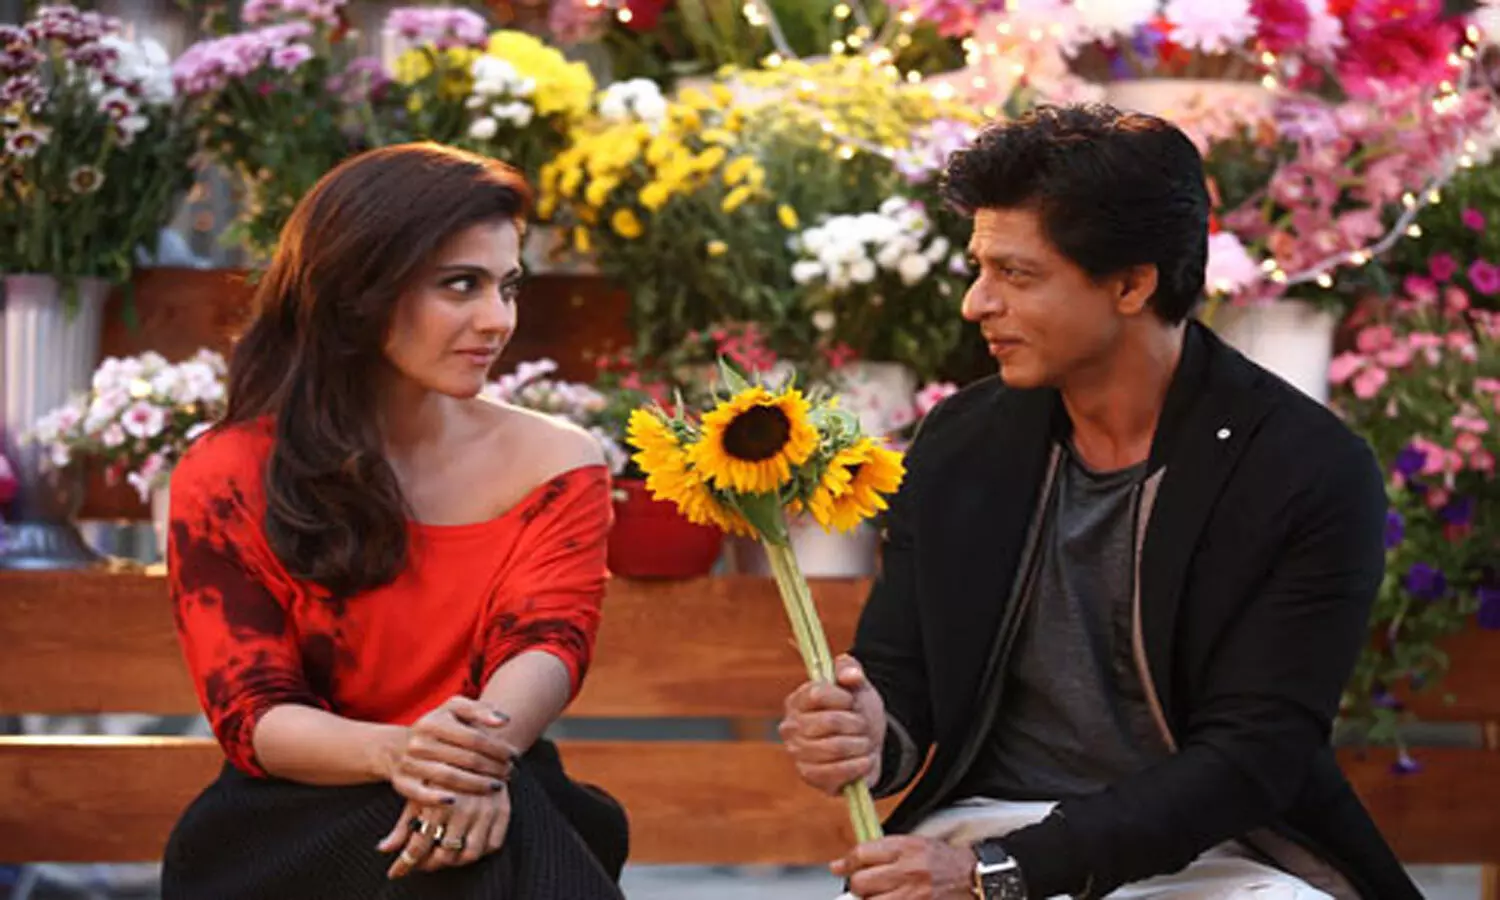 Jab SRK met Kajol: Shah Rukh Khan recalls first-ever meeting with Kajol, thought cant she be quiet?